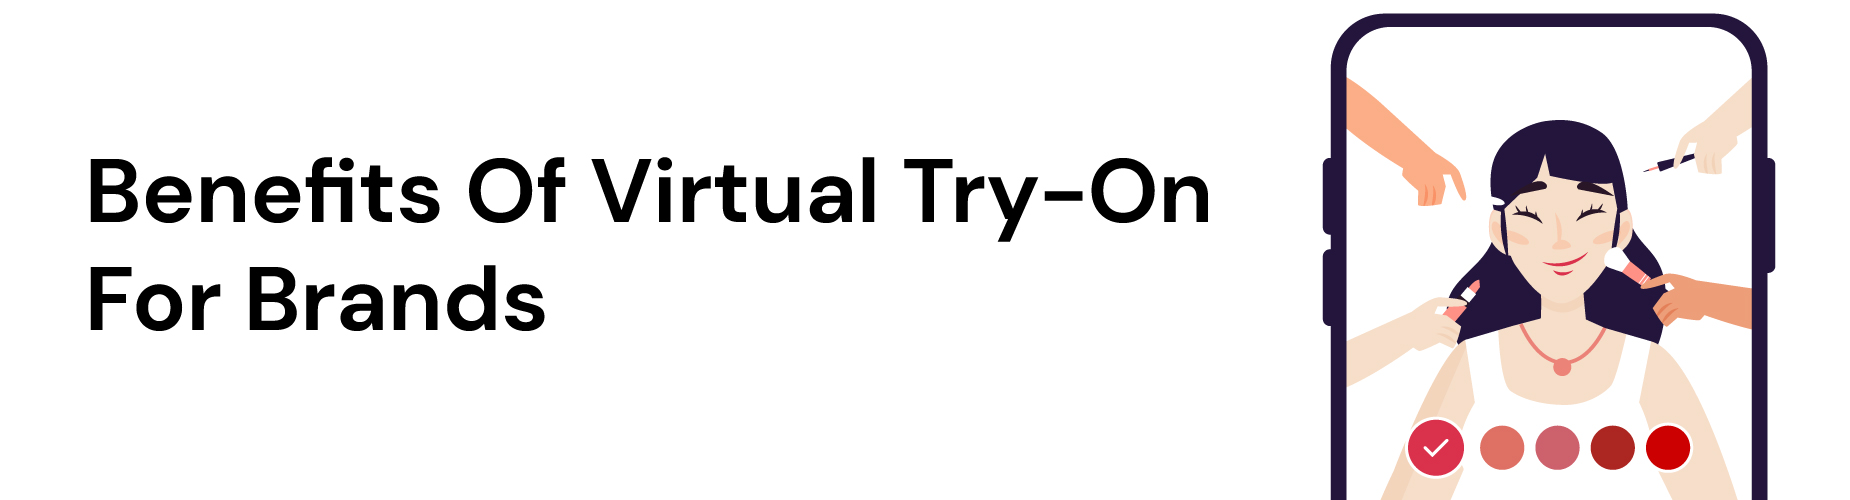 virtual try-on technology